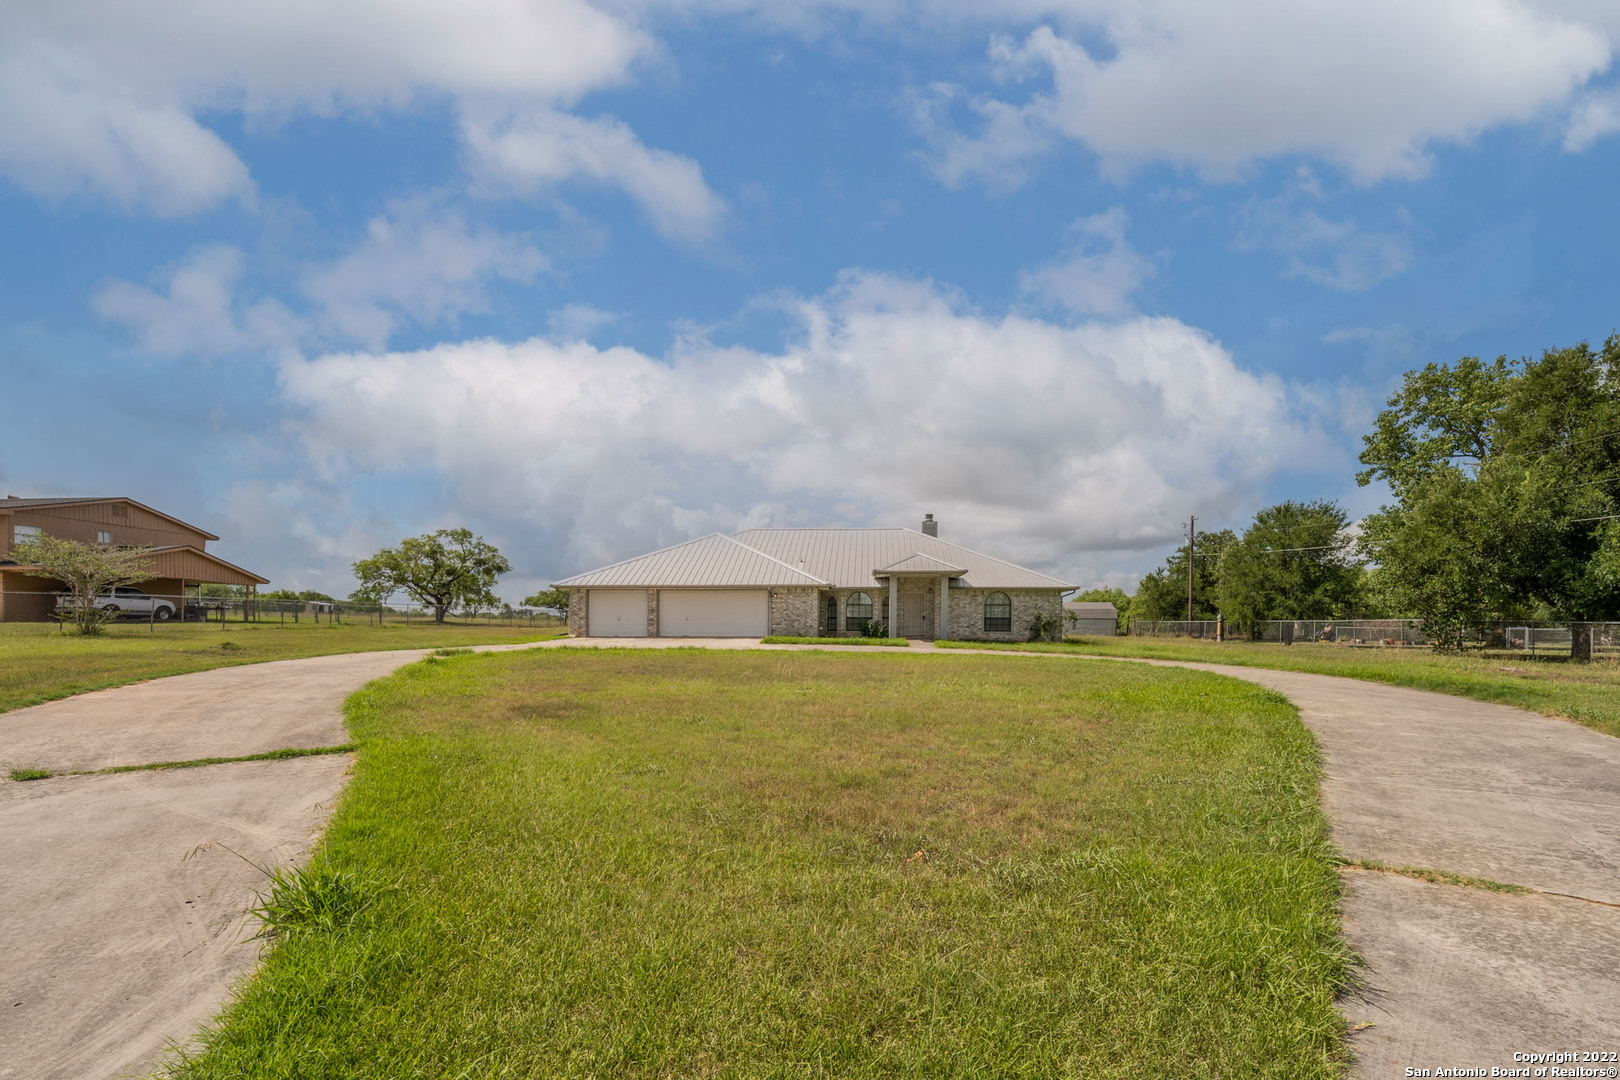 Need space?  Come see this one. Nice, single-story home. 5 bedrooms, 2 baths, 3-car garage, gated property.   An additional room can be used as an office, gym, game room, etc.  Sitting on approximately 10.09 acres. The home sits on 1.71 acres, with 8.38 additional acres in the back with a pond.   The back section can be used for cattle or horses.  Two storage sheds in the back; one large and one small.  Bring the chickens and all.  This is a great setup for the farm.